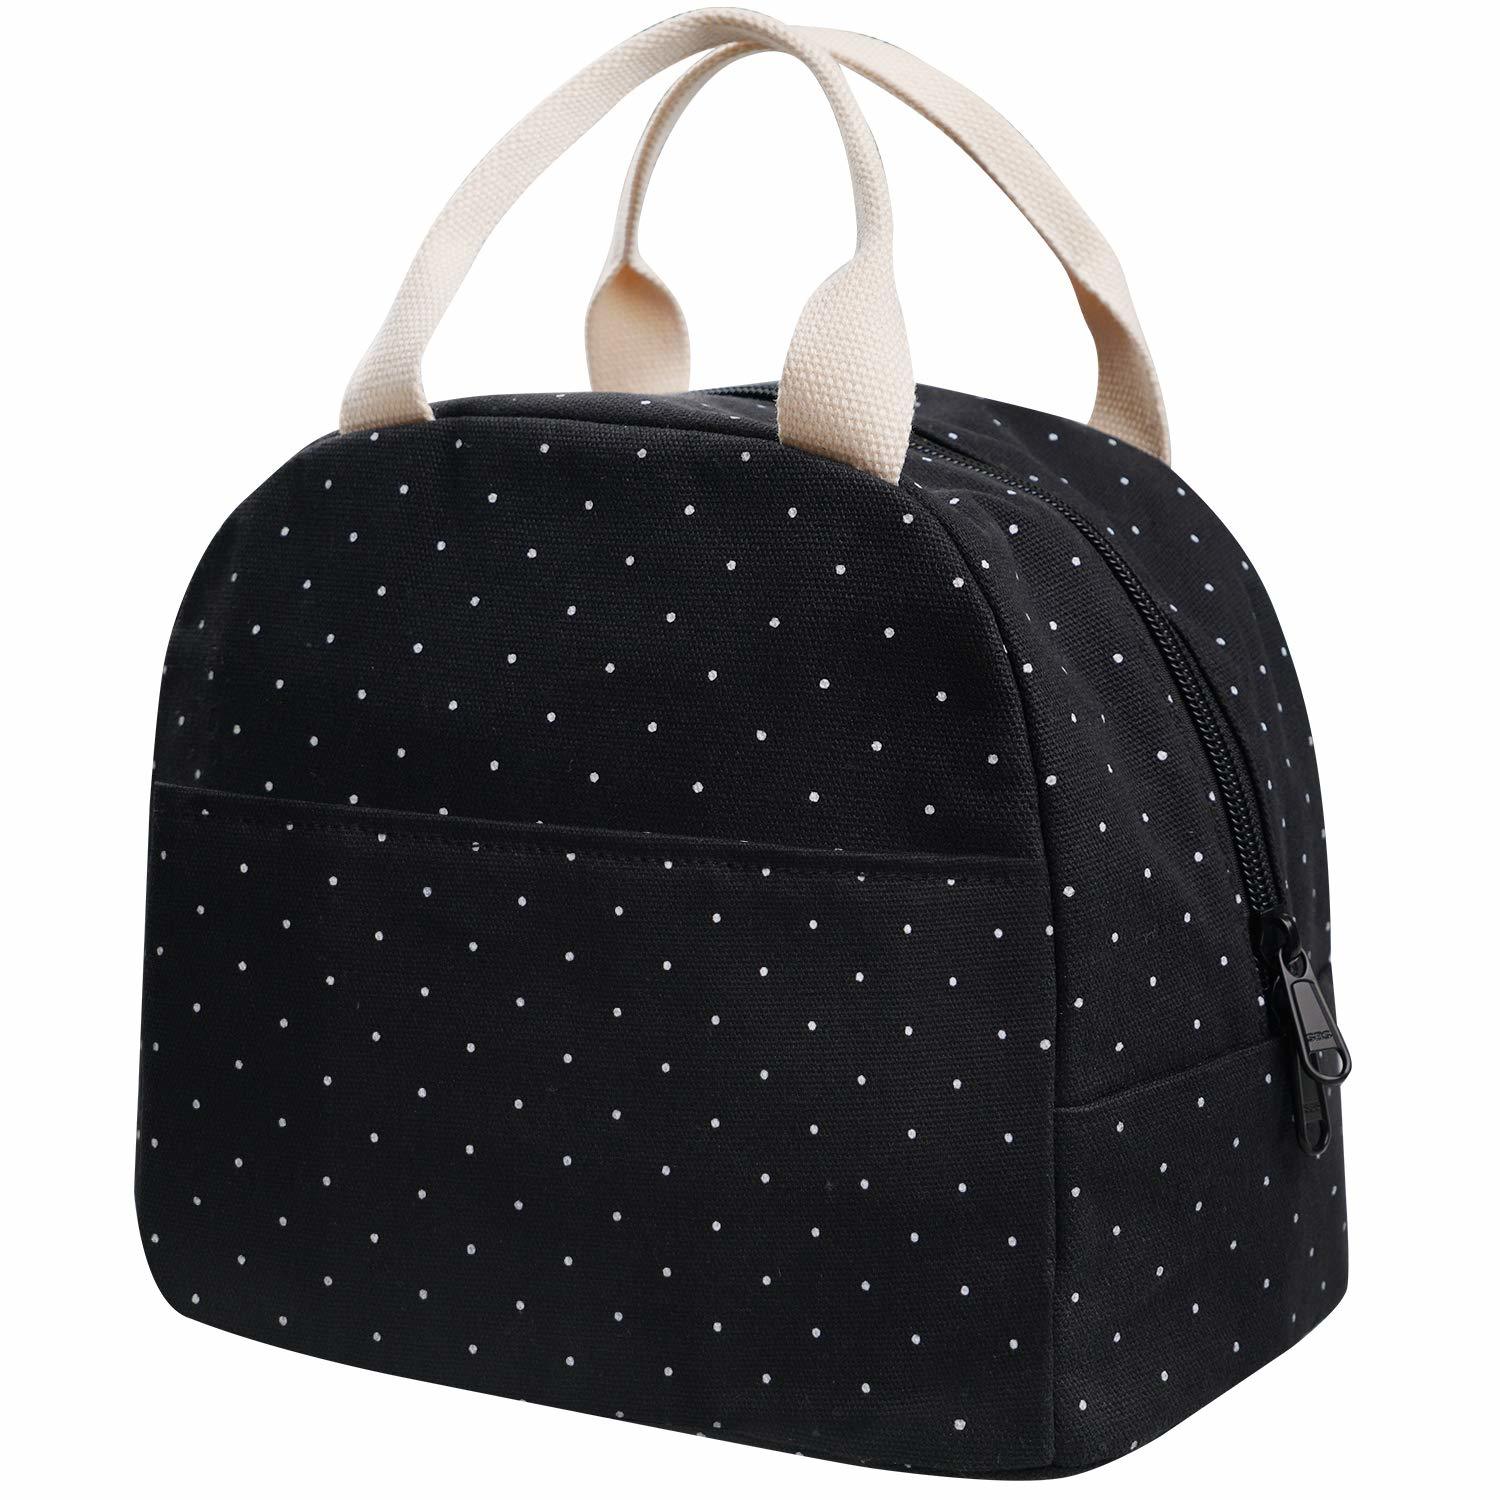 Ebd Products - Upgraded compact black lunch bag for girls women,canvas reusable polka dot lunch